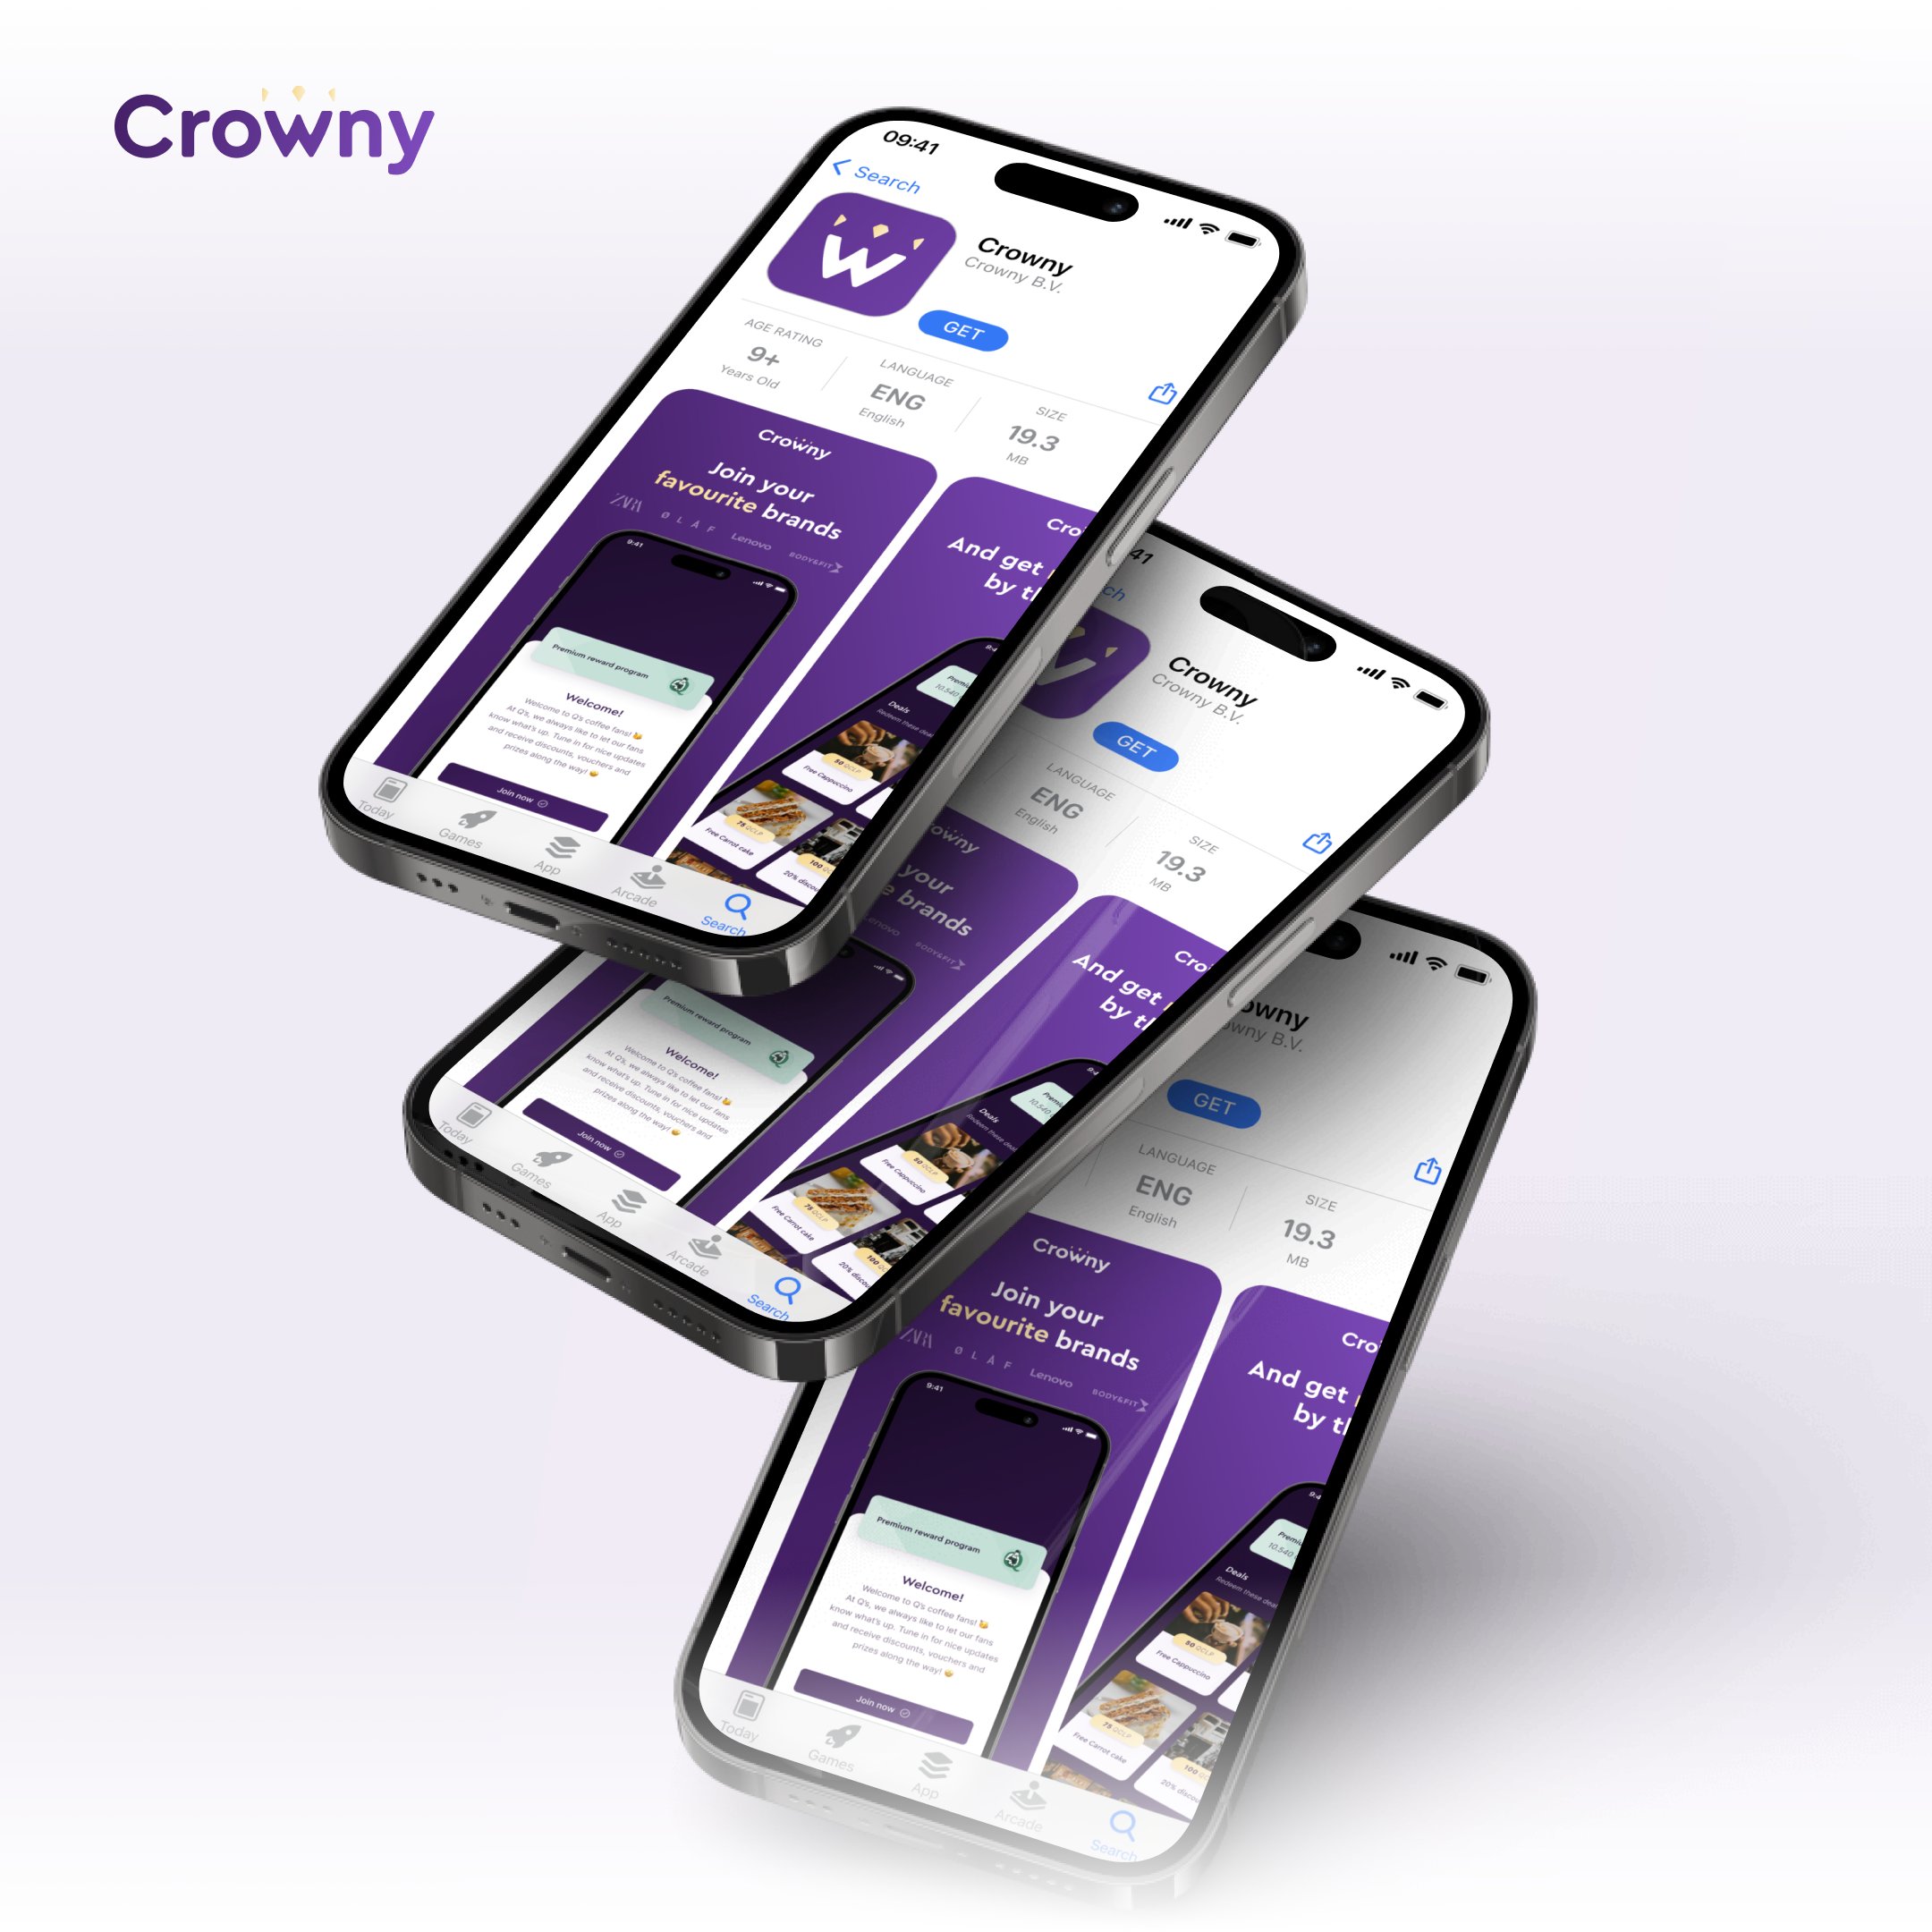 Friso mock-up of the Crowny App